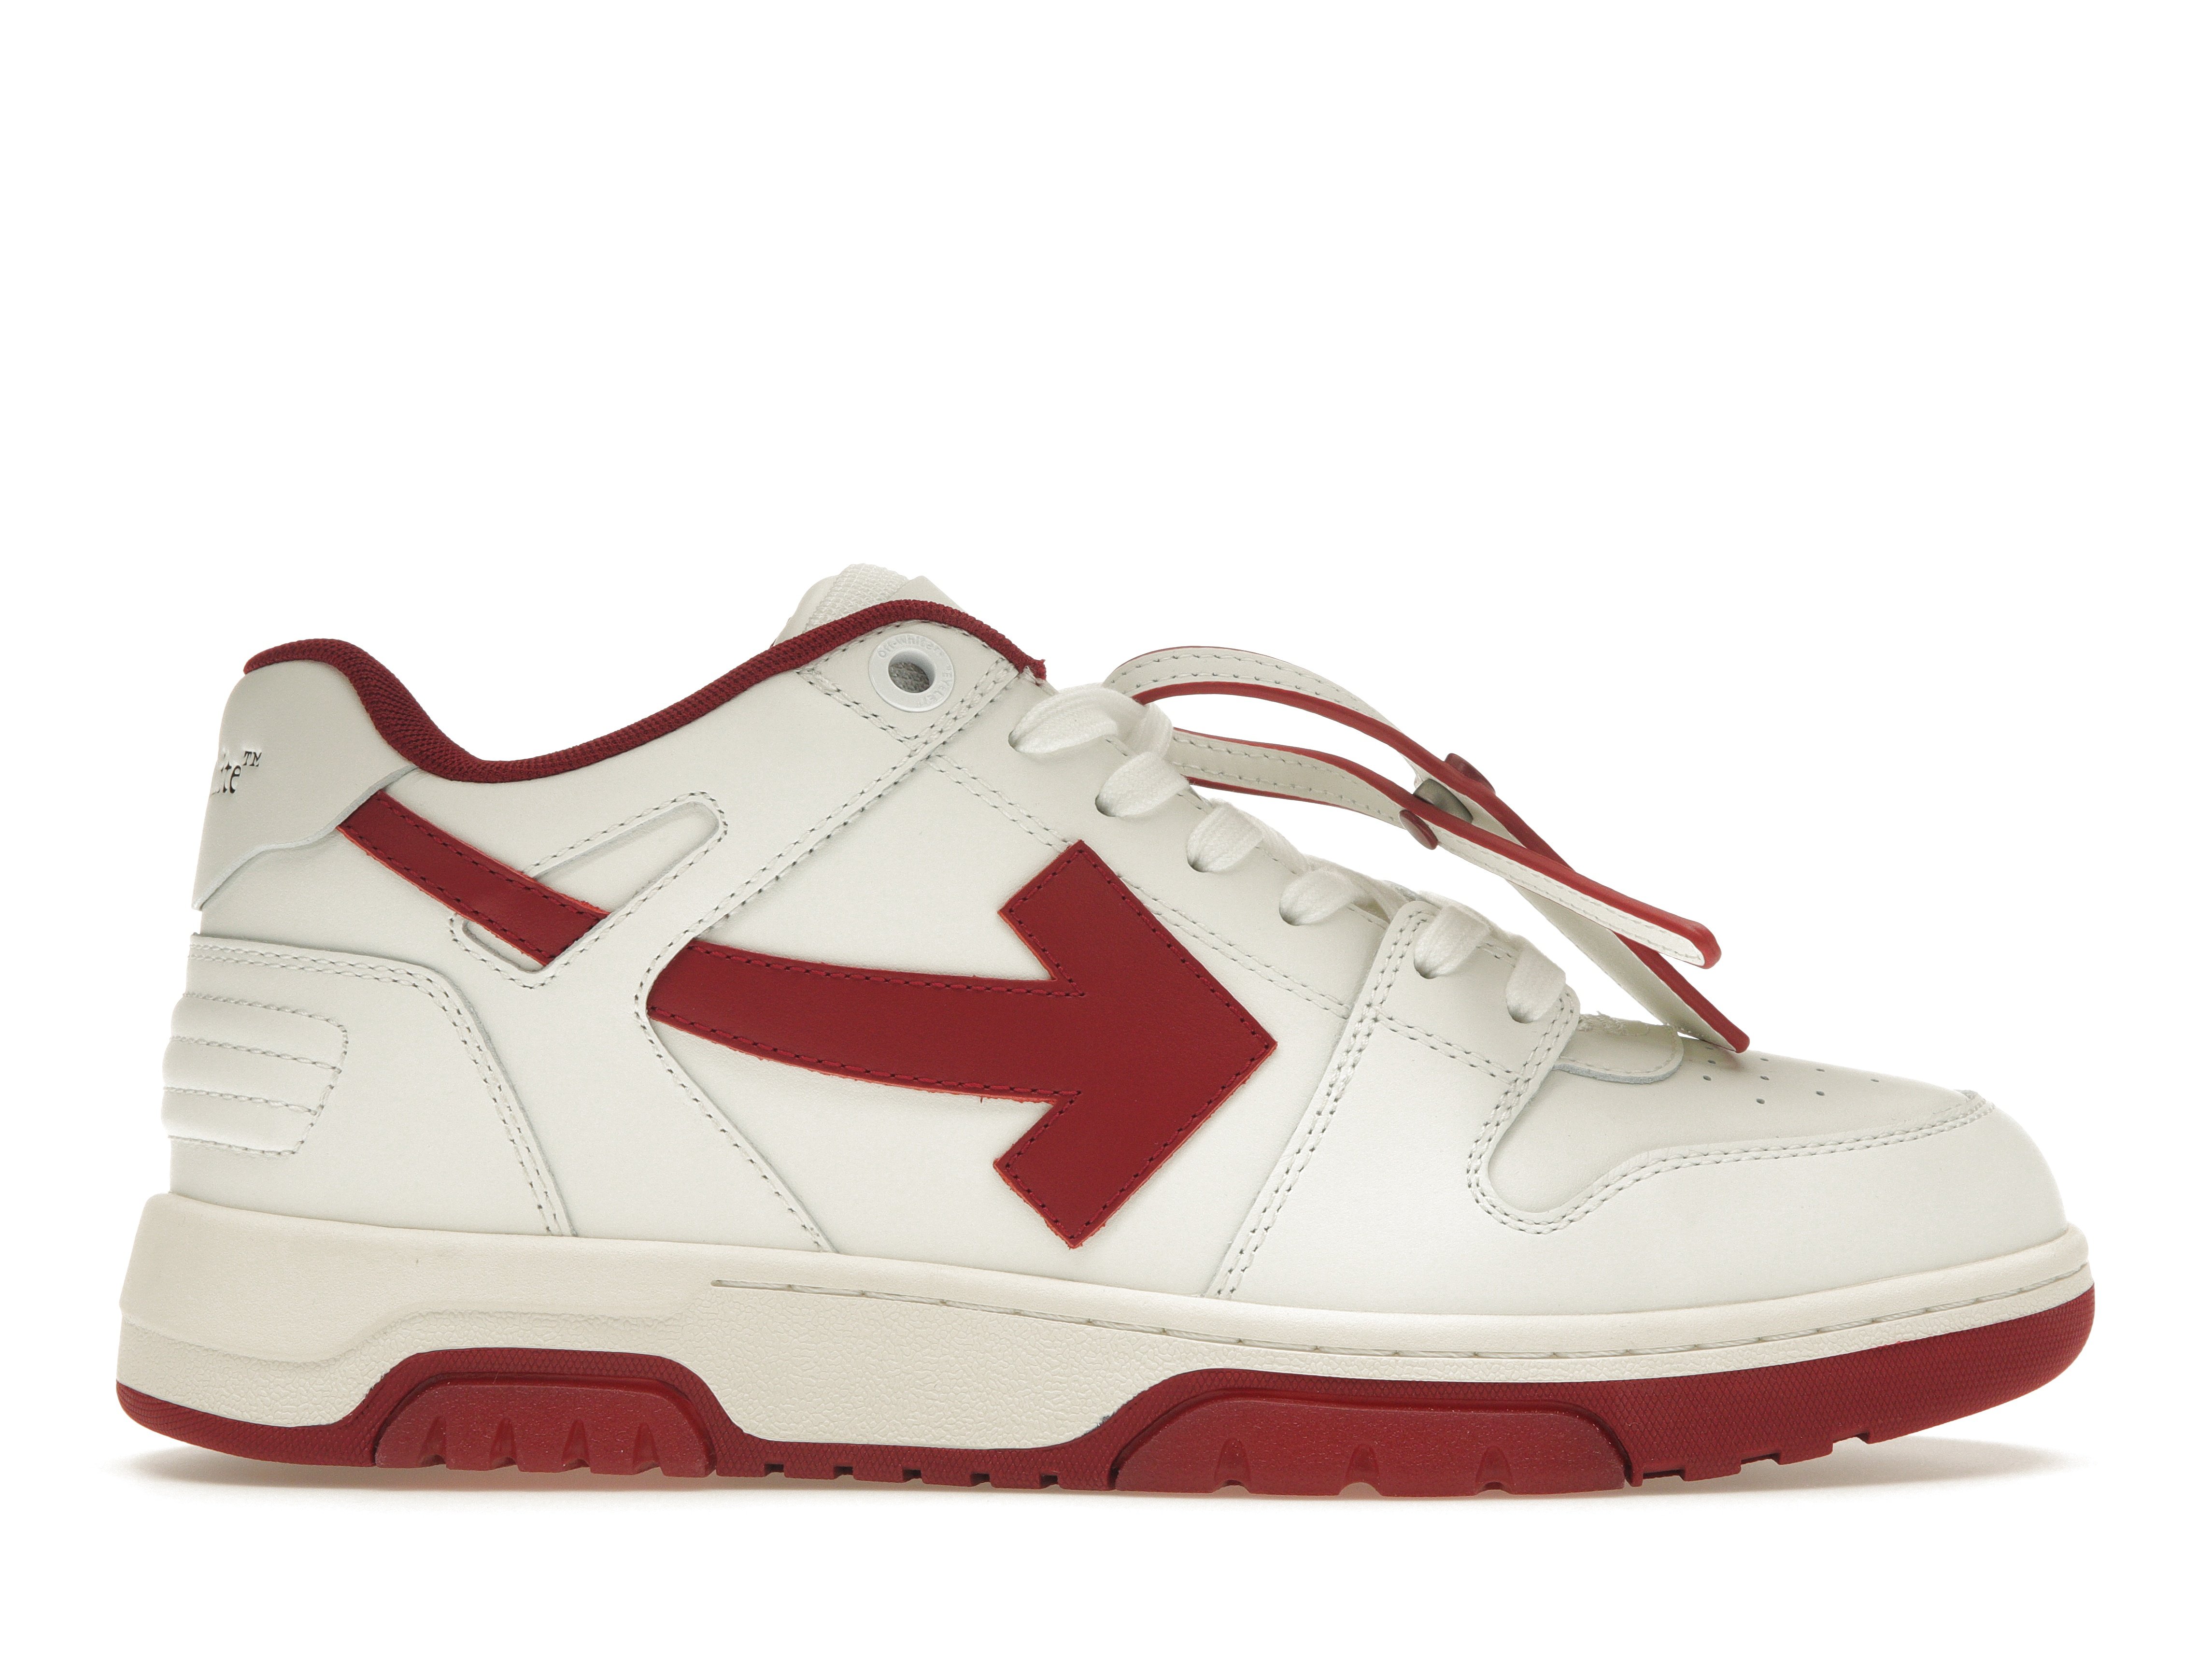 Off-White c/o Virgil Abloh 5.0 Sneakers w/ Tags - White Sneakers, Shoes -  WOWVA55284 | The RealReal